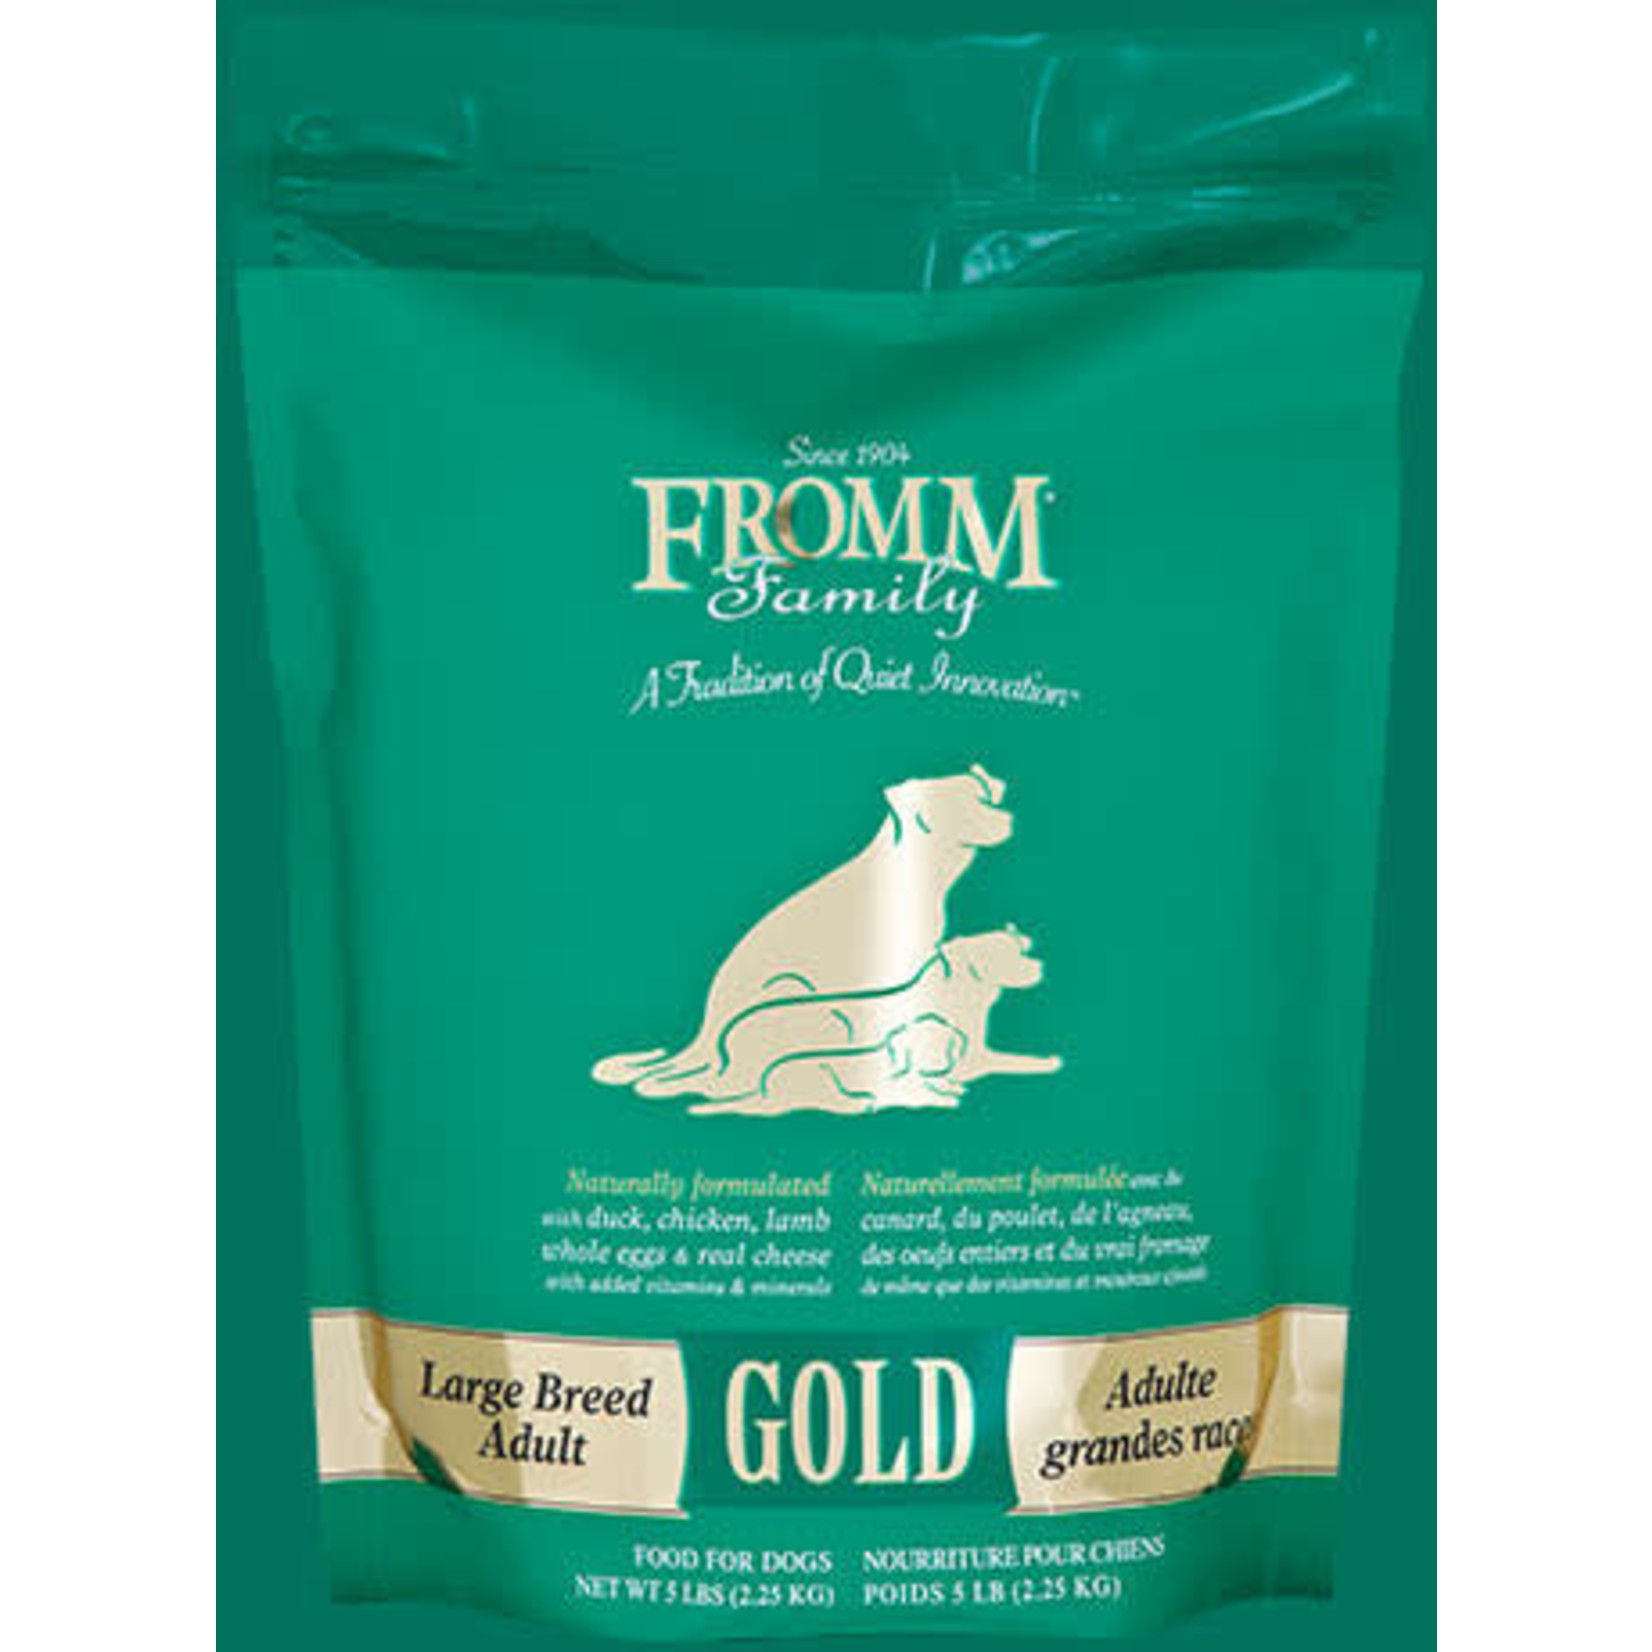 Fromm Family Fromm Large Breed Adult Gold Dog Food